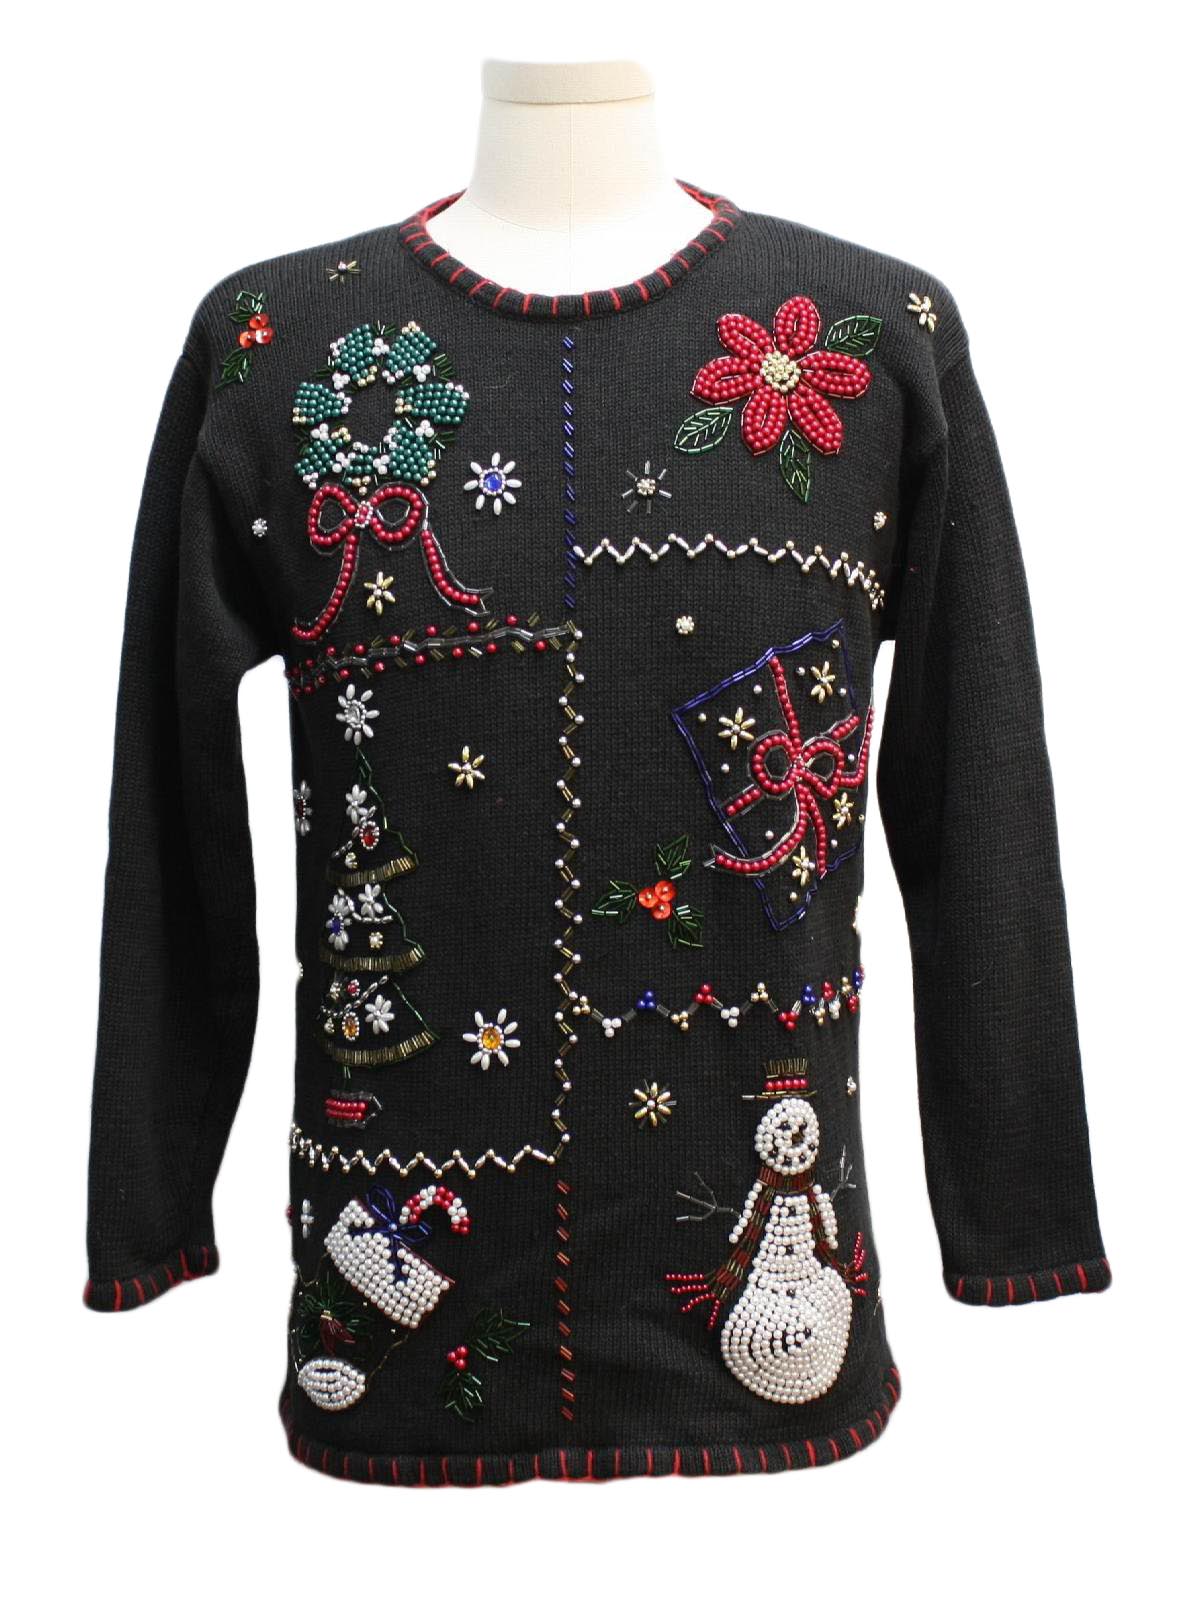 Womens Ugly Christmas Sweater: -Carolyn Taylor- Womens black background ...